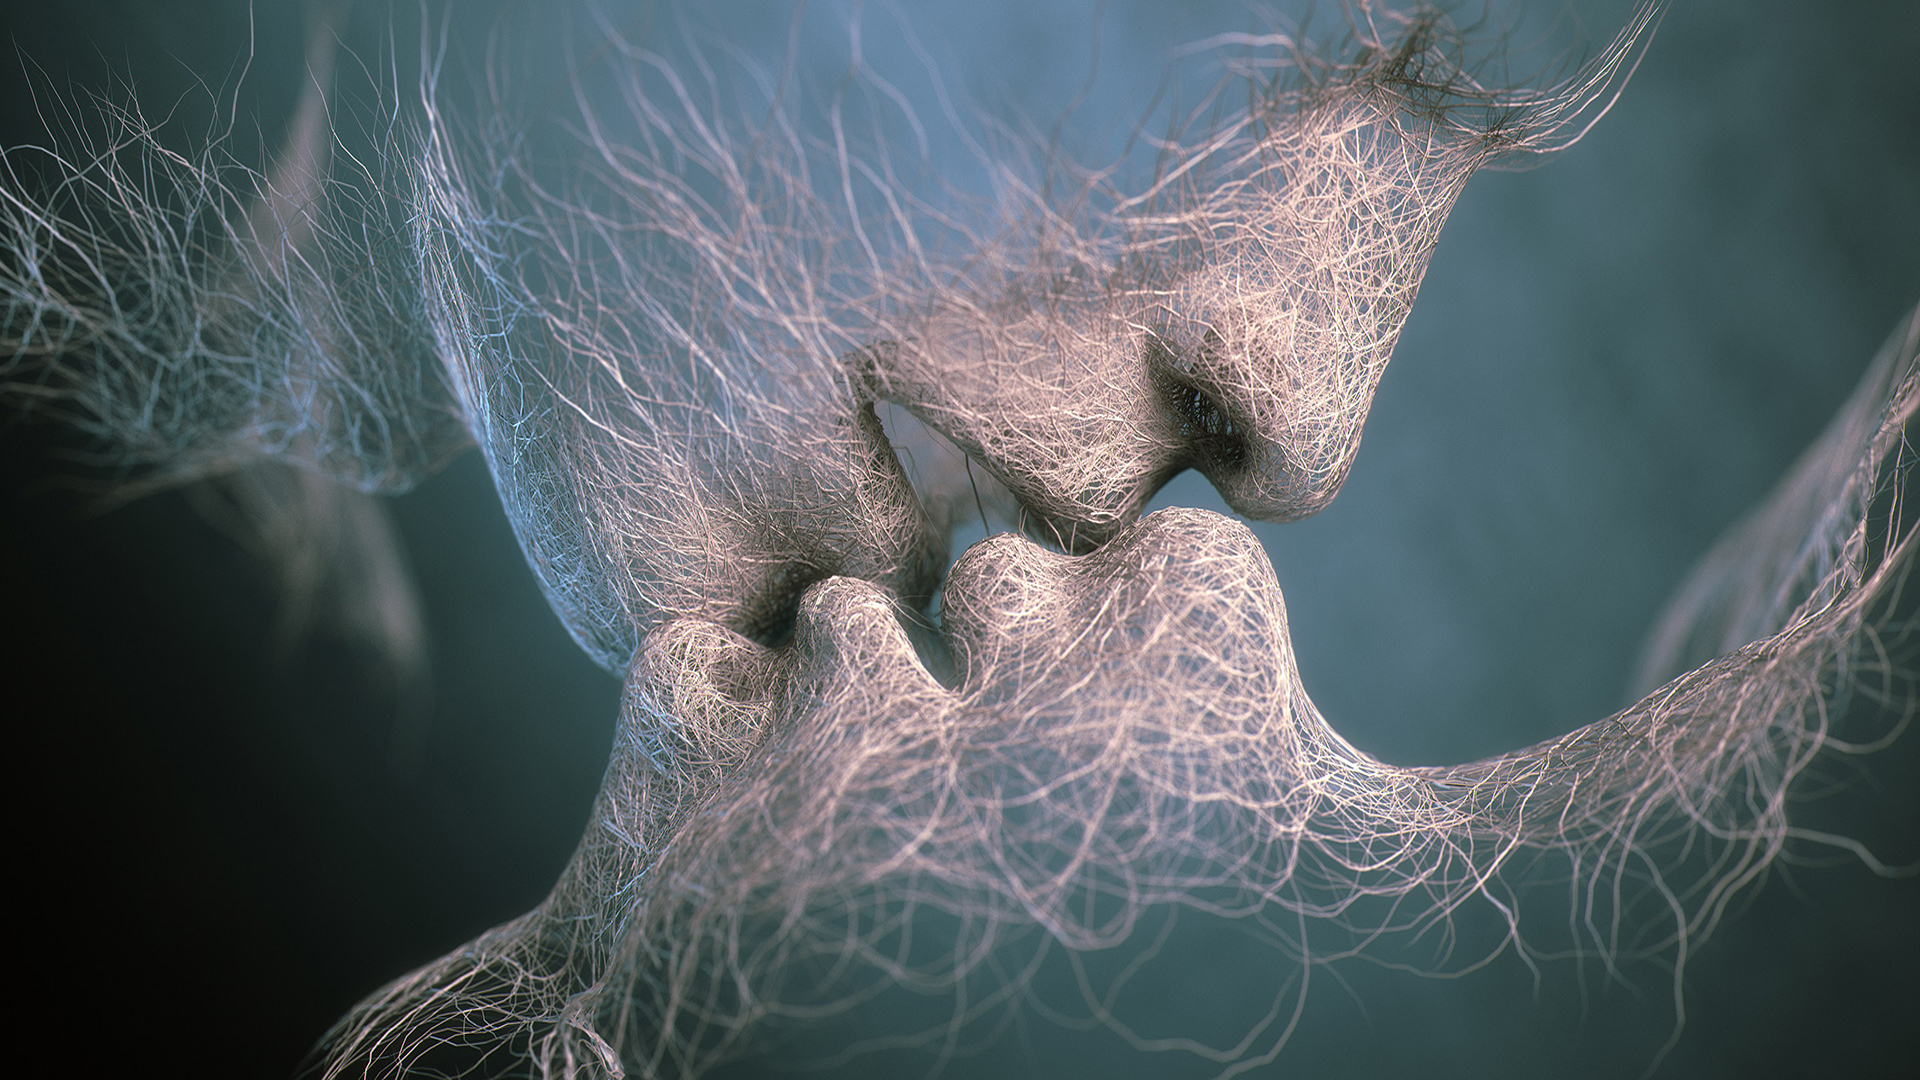 Impossible Love by Adam Martinakis